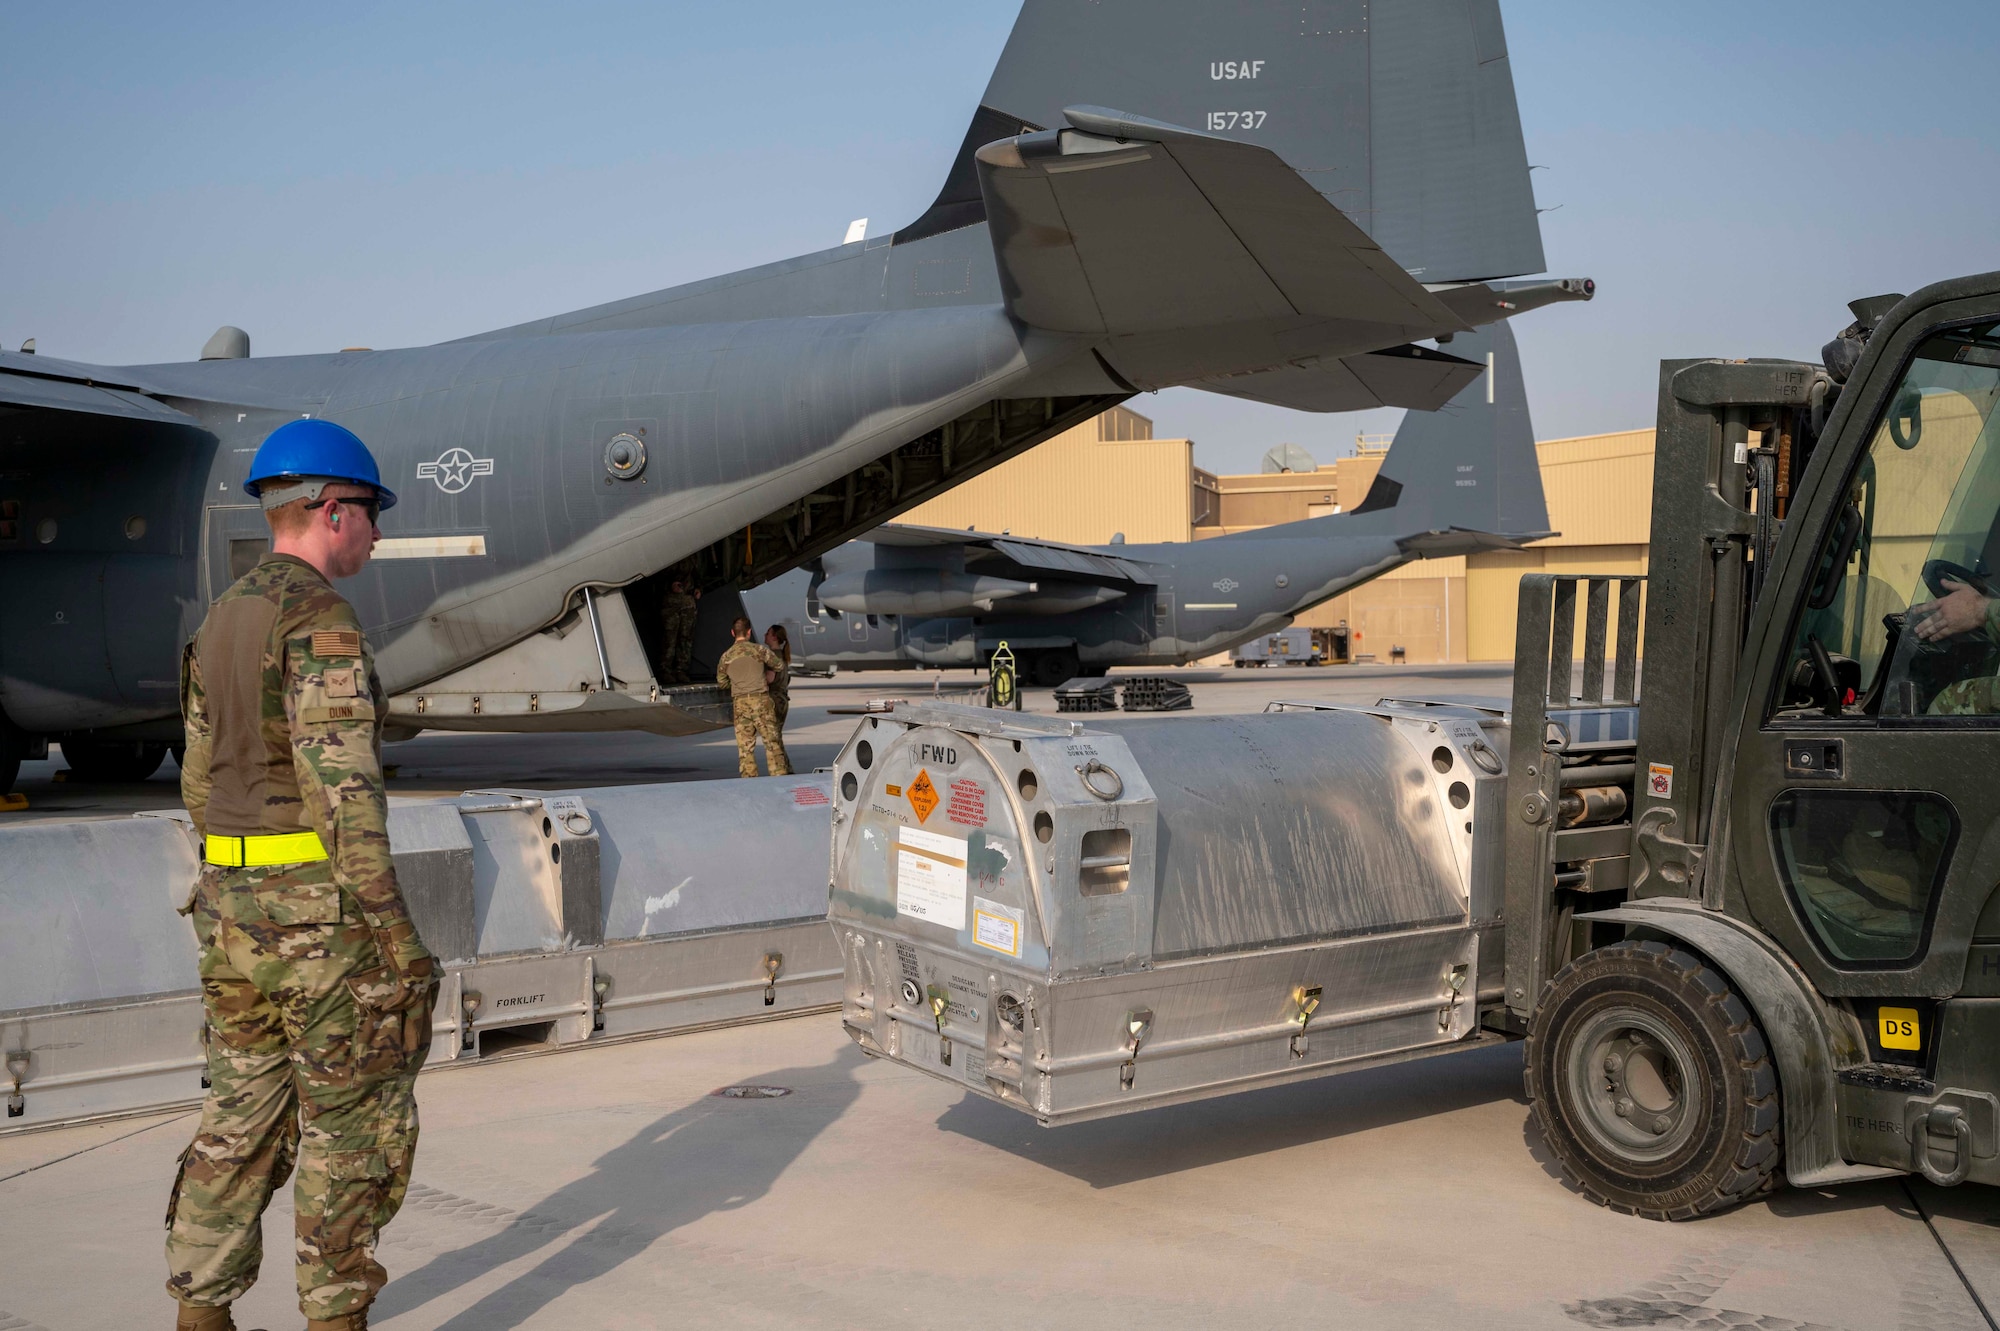 Members of the U.S. Air Force 6th Expeditionary Maintenance Squadron and the 6th Special Operations Tasking Unit stage Joint Air-to-Surface Standoff Missiles (JASSM) next to an MC-130J Commando II at Al Udeid Air Base, Qatar, Aug. 6, 2023. The Rapid Dragon palletized munitions system is capable of deploying long-range cruise missiles using standard airdrop procedures from cargo aircraft like the MC-130J operated by Air Force Special Operations Command. Rapid Dragon is a precision munitions capability for medium-sized or larger cargo aircraft that allows U.S. forces a flexible rapid response option. (U.S. Air Force photo by Staff Sgt. Frank Rohrig)